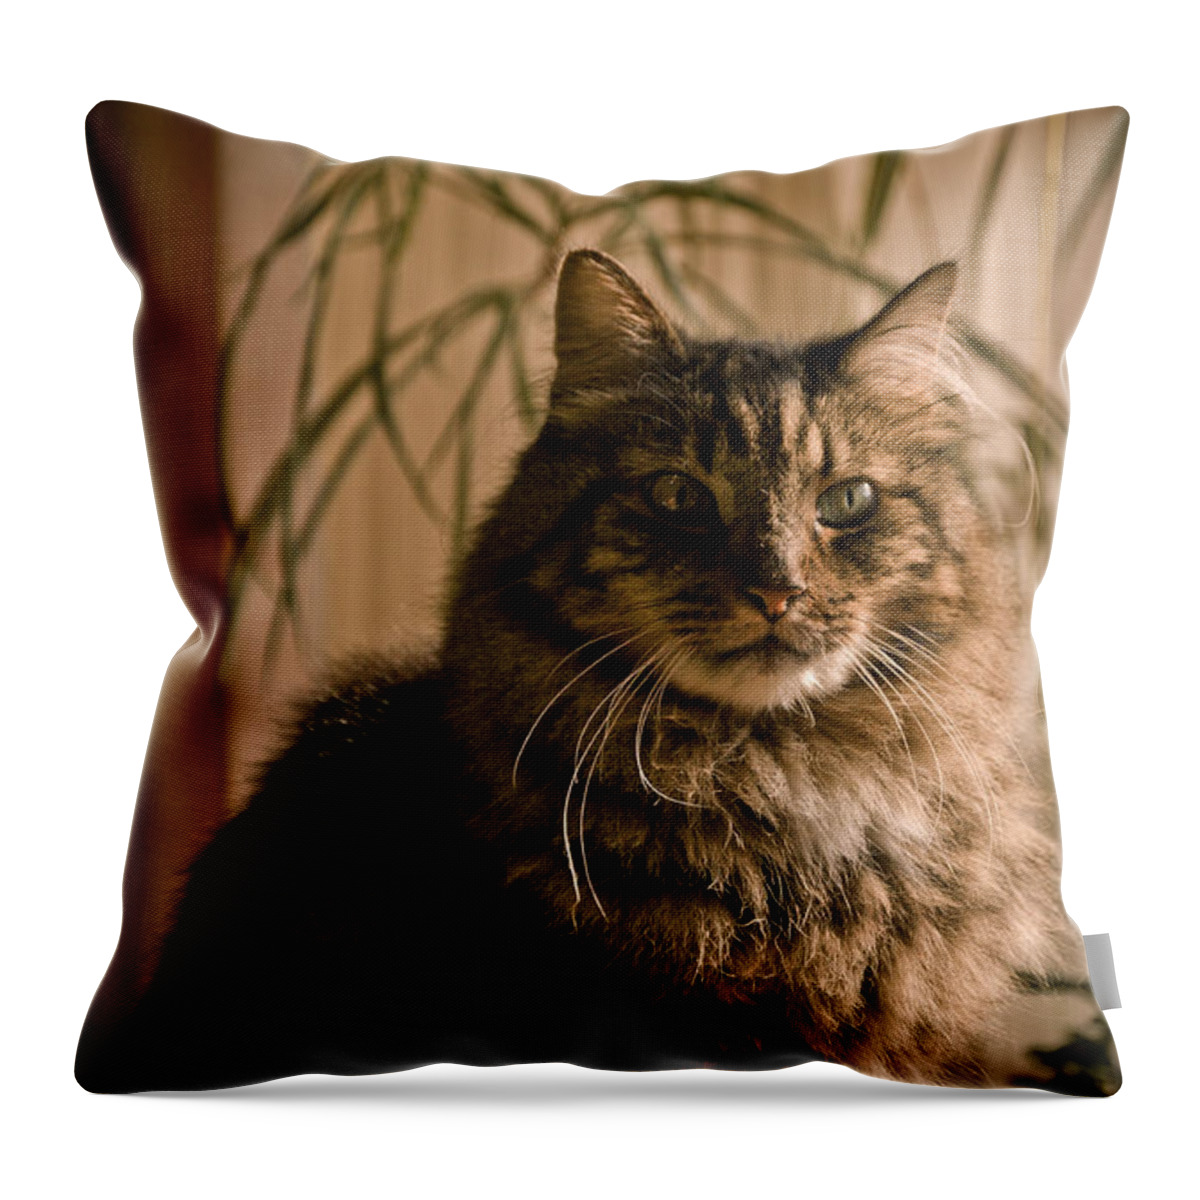 Kitten Throw Pillow featuring the photograph Handsome Harv by Trish Tritz